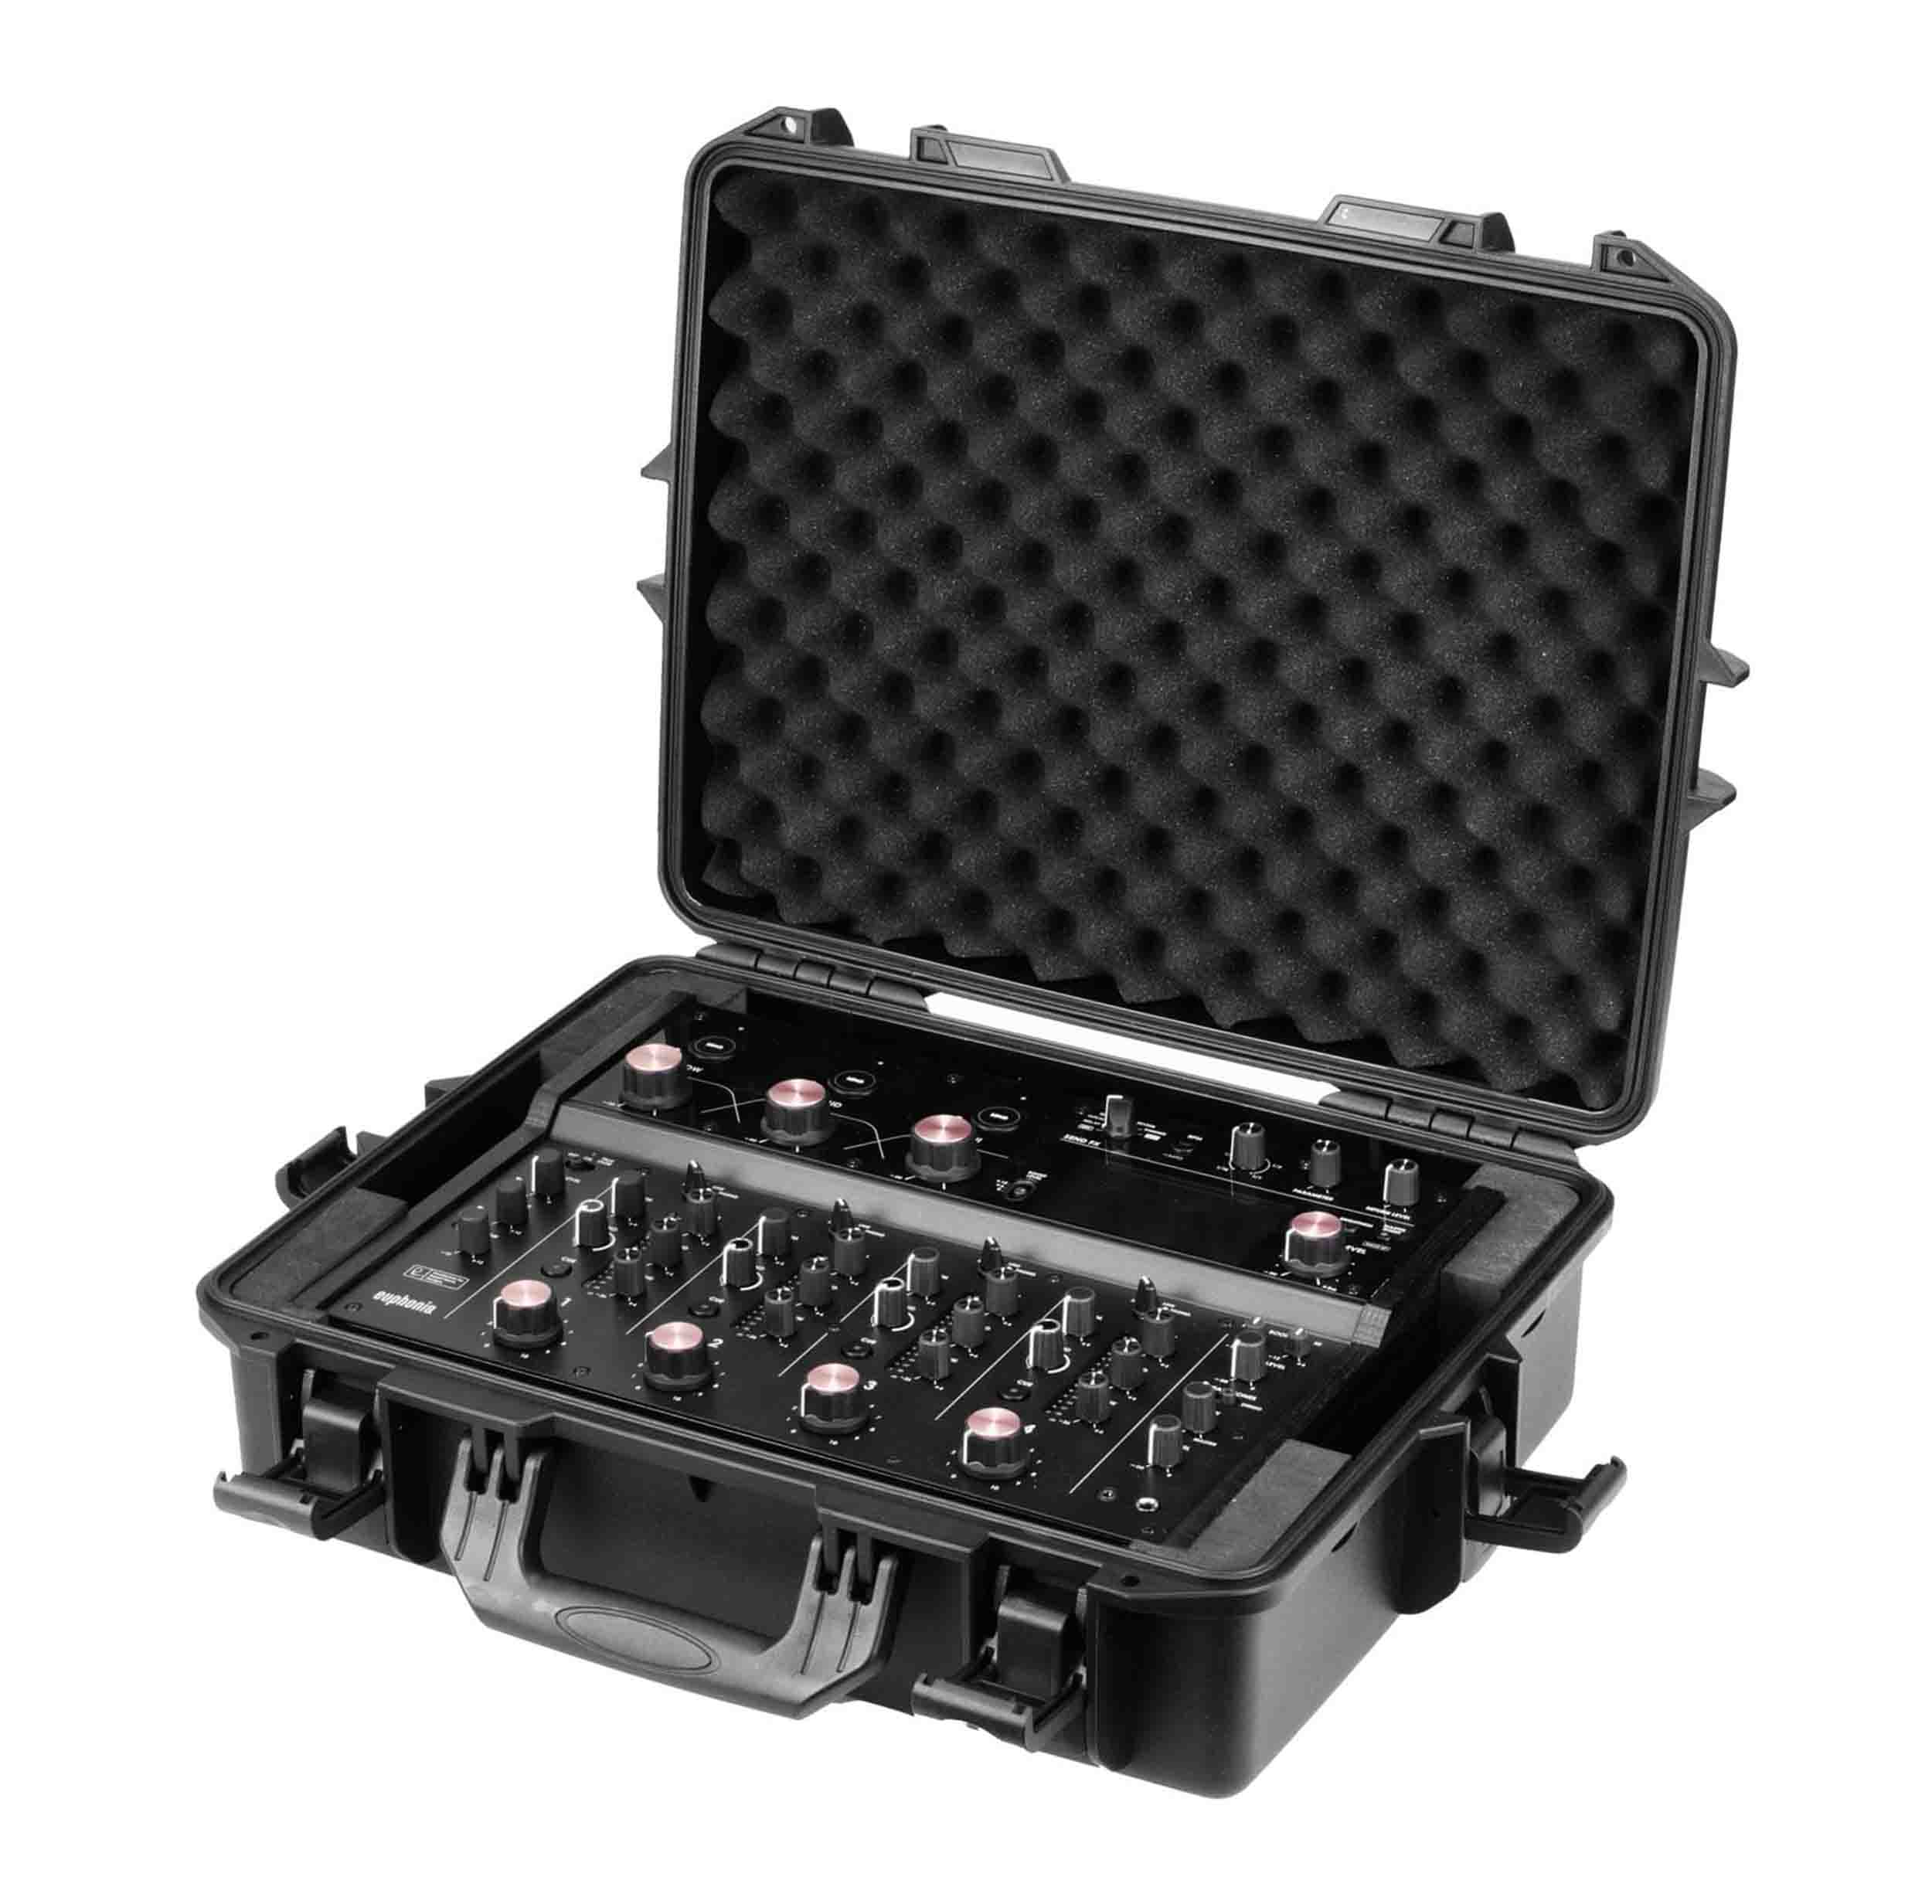 Odyssey VUATEUPHONIA, Watertight Dust-Proof Injection-Molded Case for AlphaTheta Euphonia DJ Mixer by Odyssey